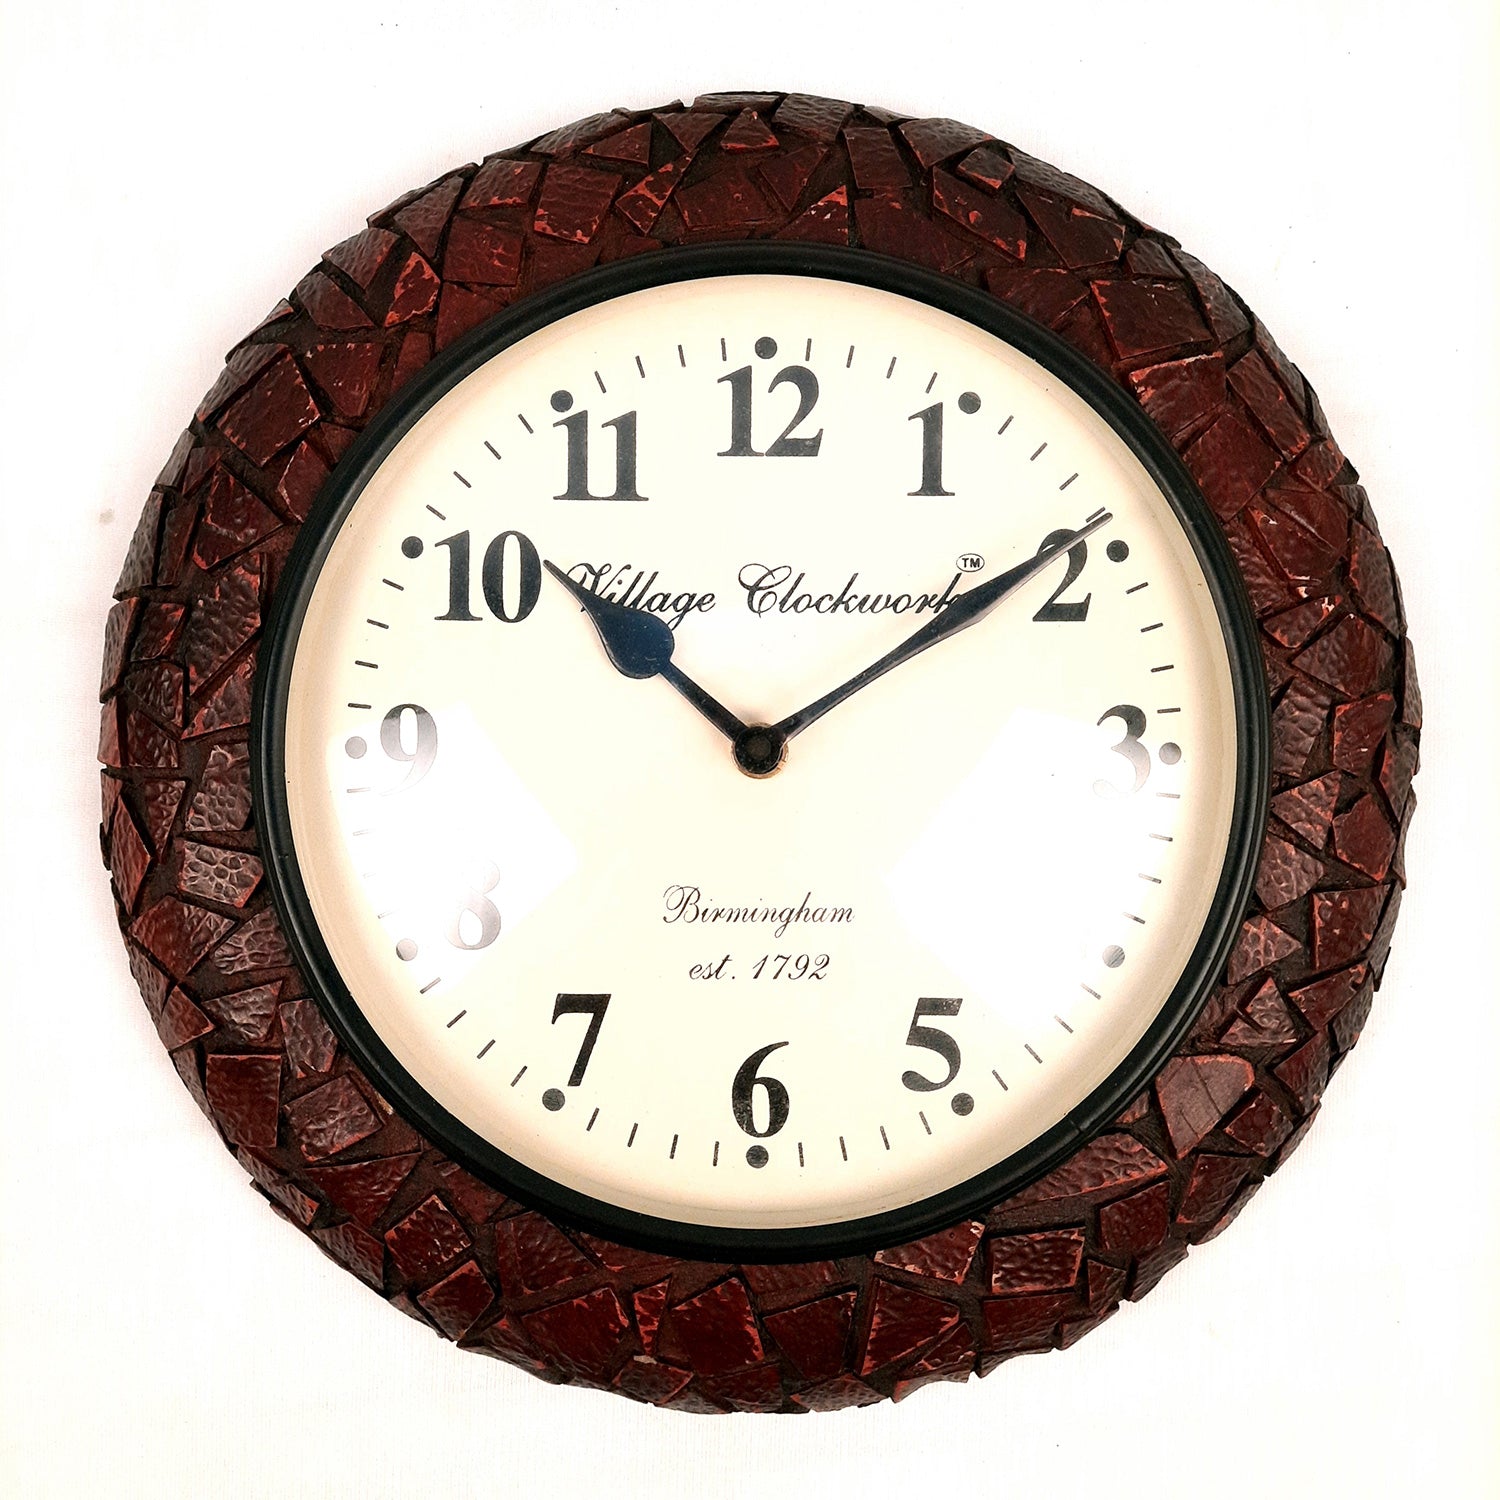 Wall Clock for Home | Wall Mount Analog Watch | Deewar Ghadi - For Living Room, Bedroom, Hall, Office Decor & Gift - 12 Inch